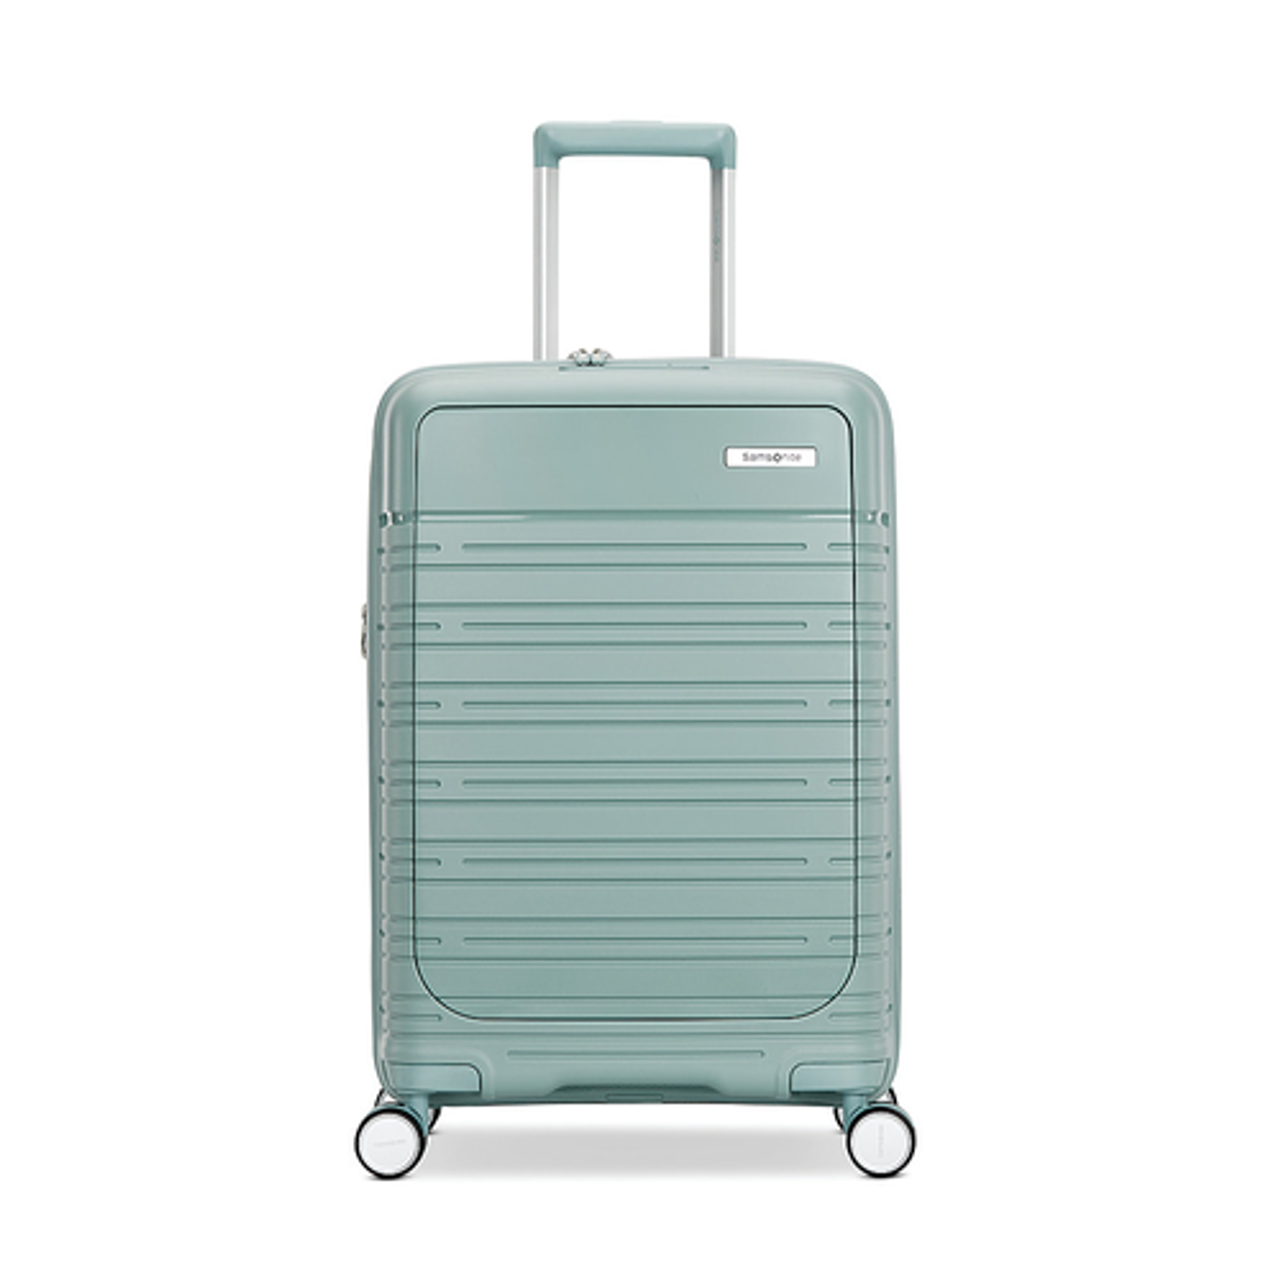 Samsonite - Elevation Plus 21" Expandable Carry-On Spinner Suitcase - Cypress Green